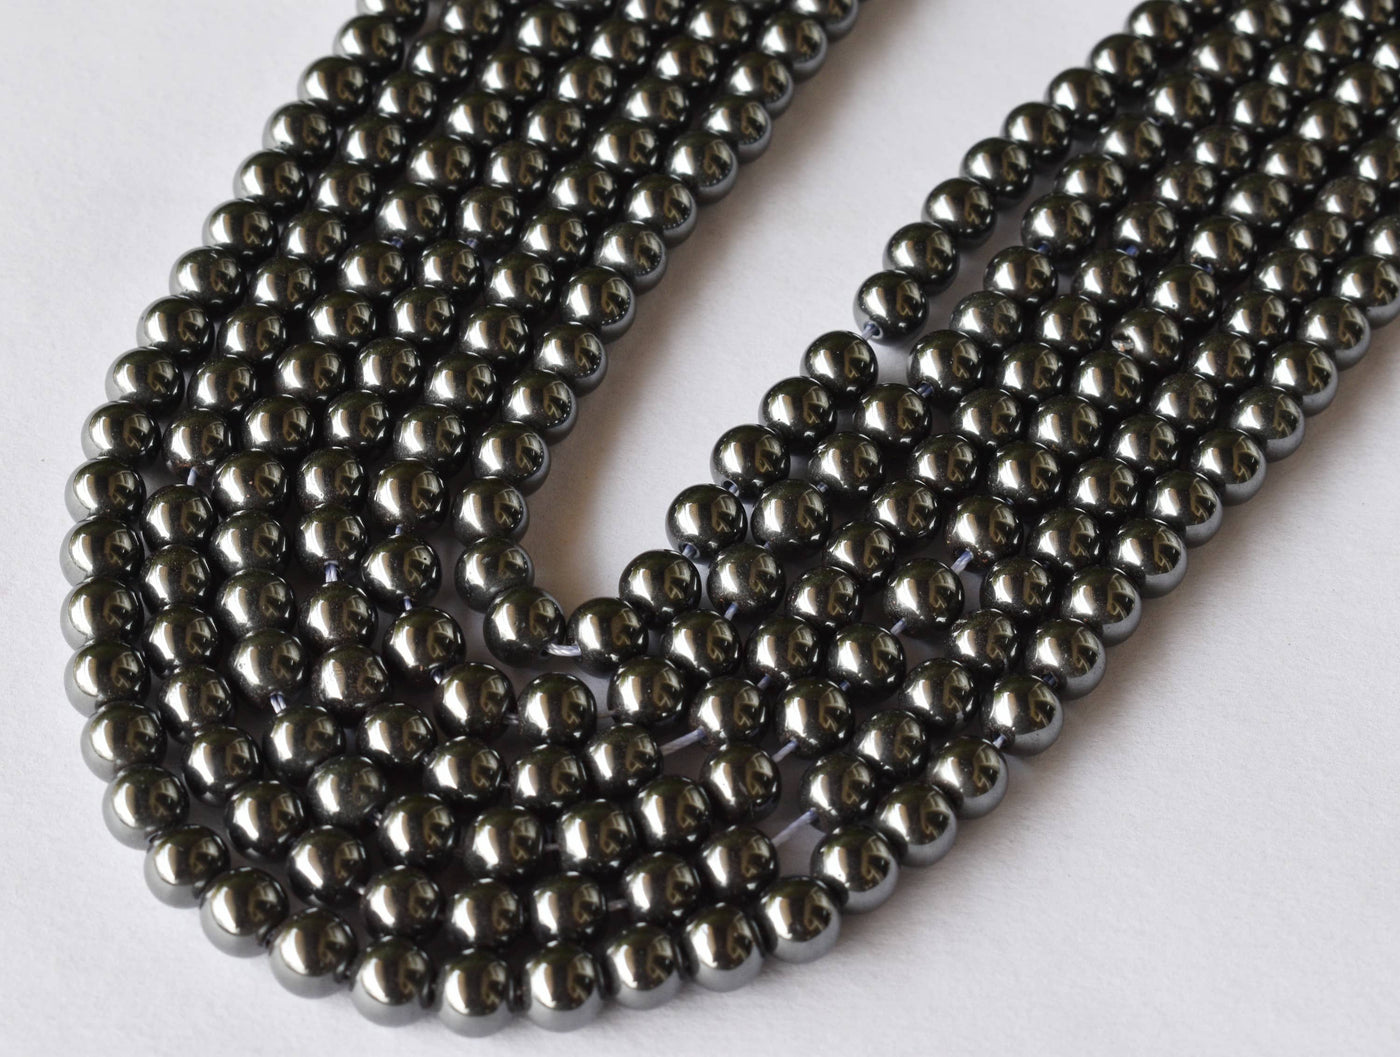 Hématite AAA Grade 2mm, 3mm, 4mm, 6mm, 8mm, 10mm, 12mm, 14mm, 16mm, 18mm, 20mm Perles rondes